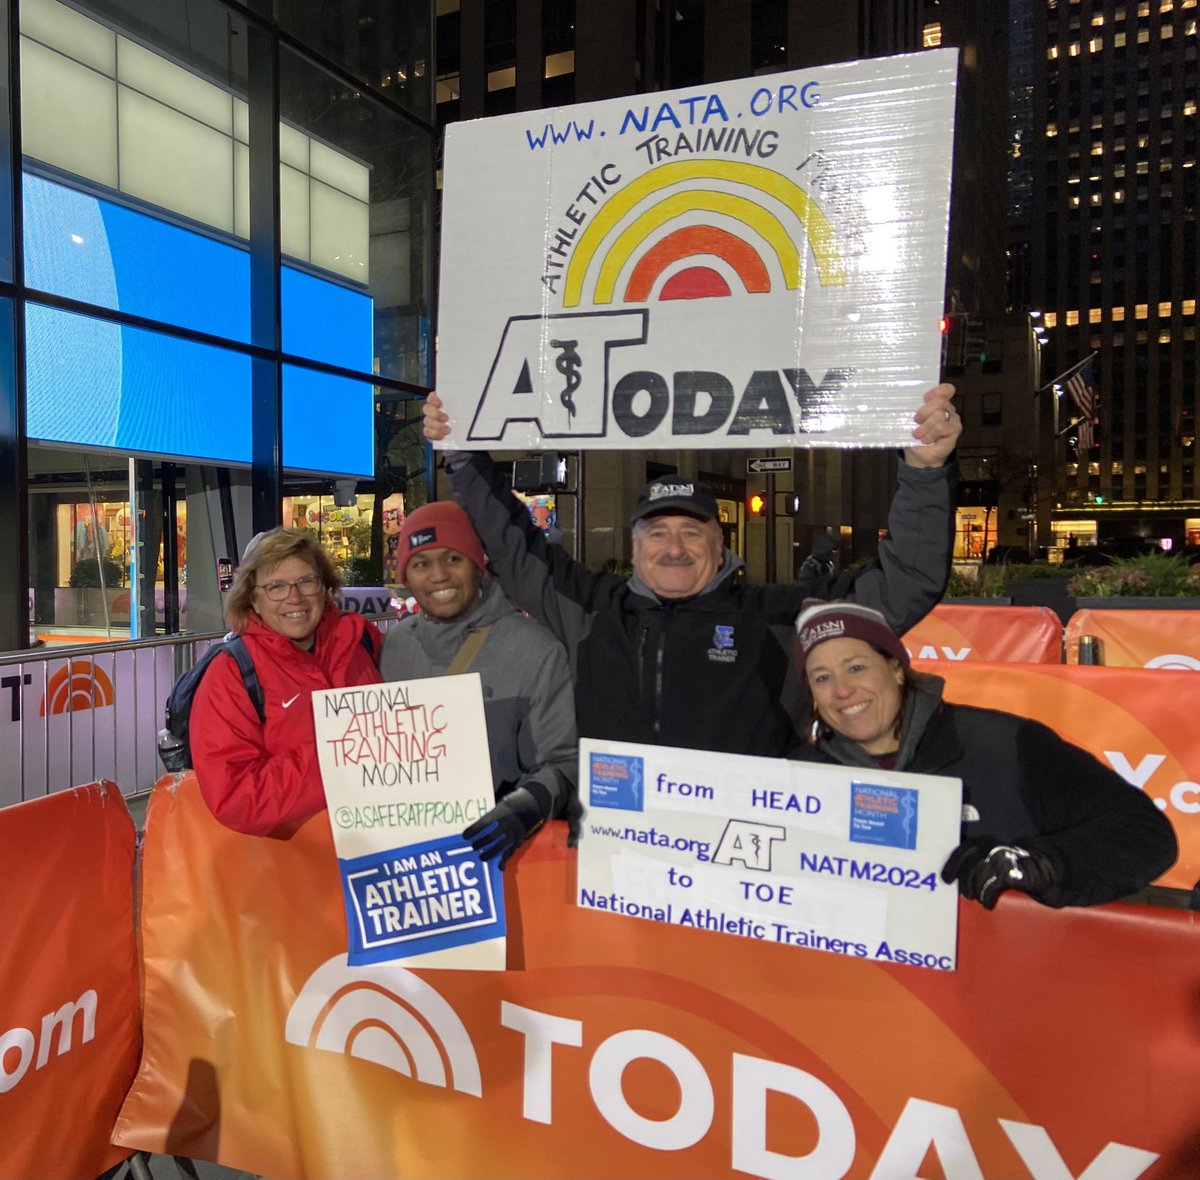 WHAT TIME IS IT? March is National Athletic Training Month. Time to celebrATe, advocaATe & promote the profession on The TODAY Show Plaza. My 10th Year…Same Sign. With @emrichatc @KKoshansky @kuya_roy_f